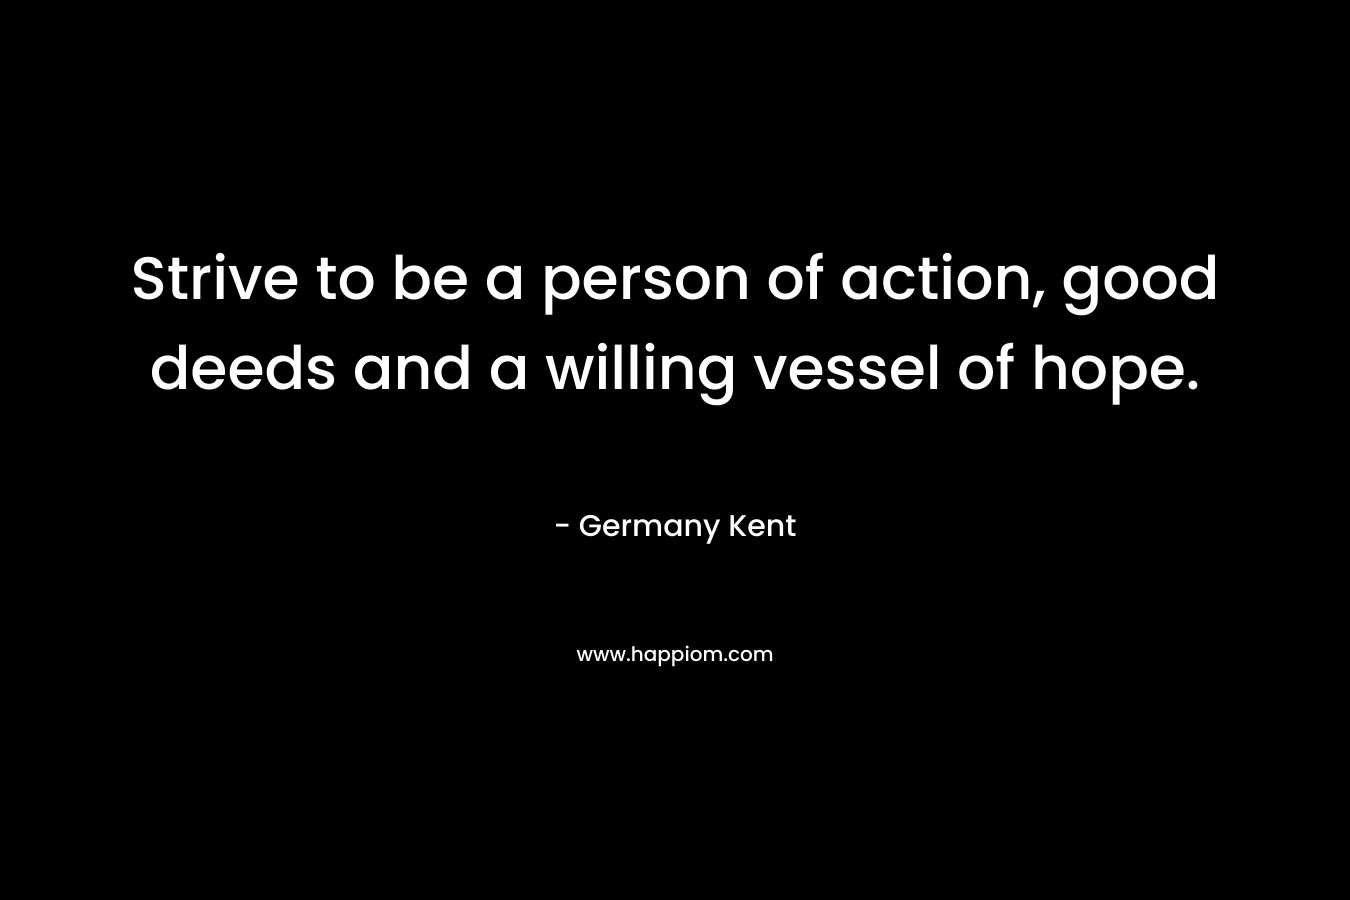 Strive to be a person of action, good deeds and a willing vessel of hope. – Germany Kent